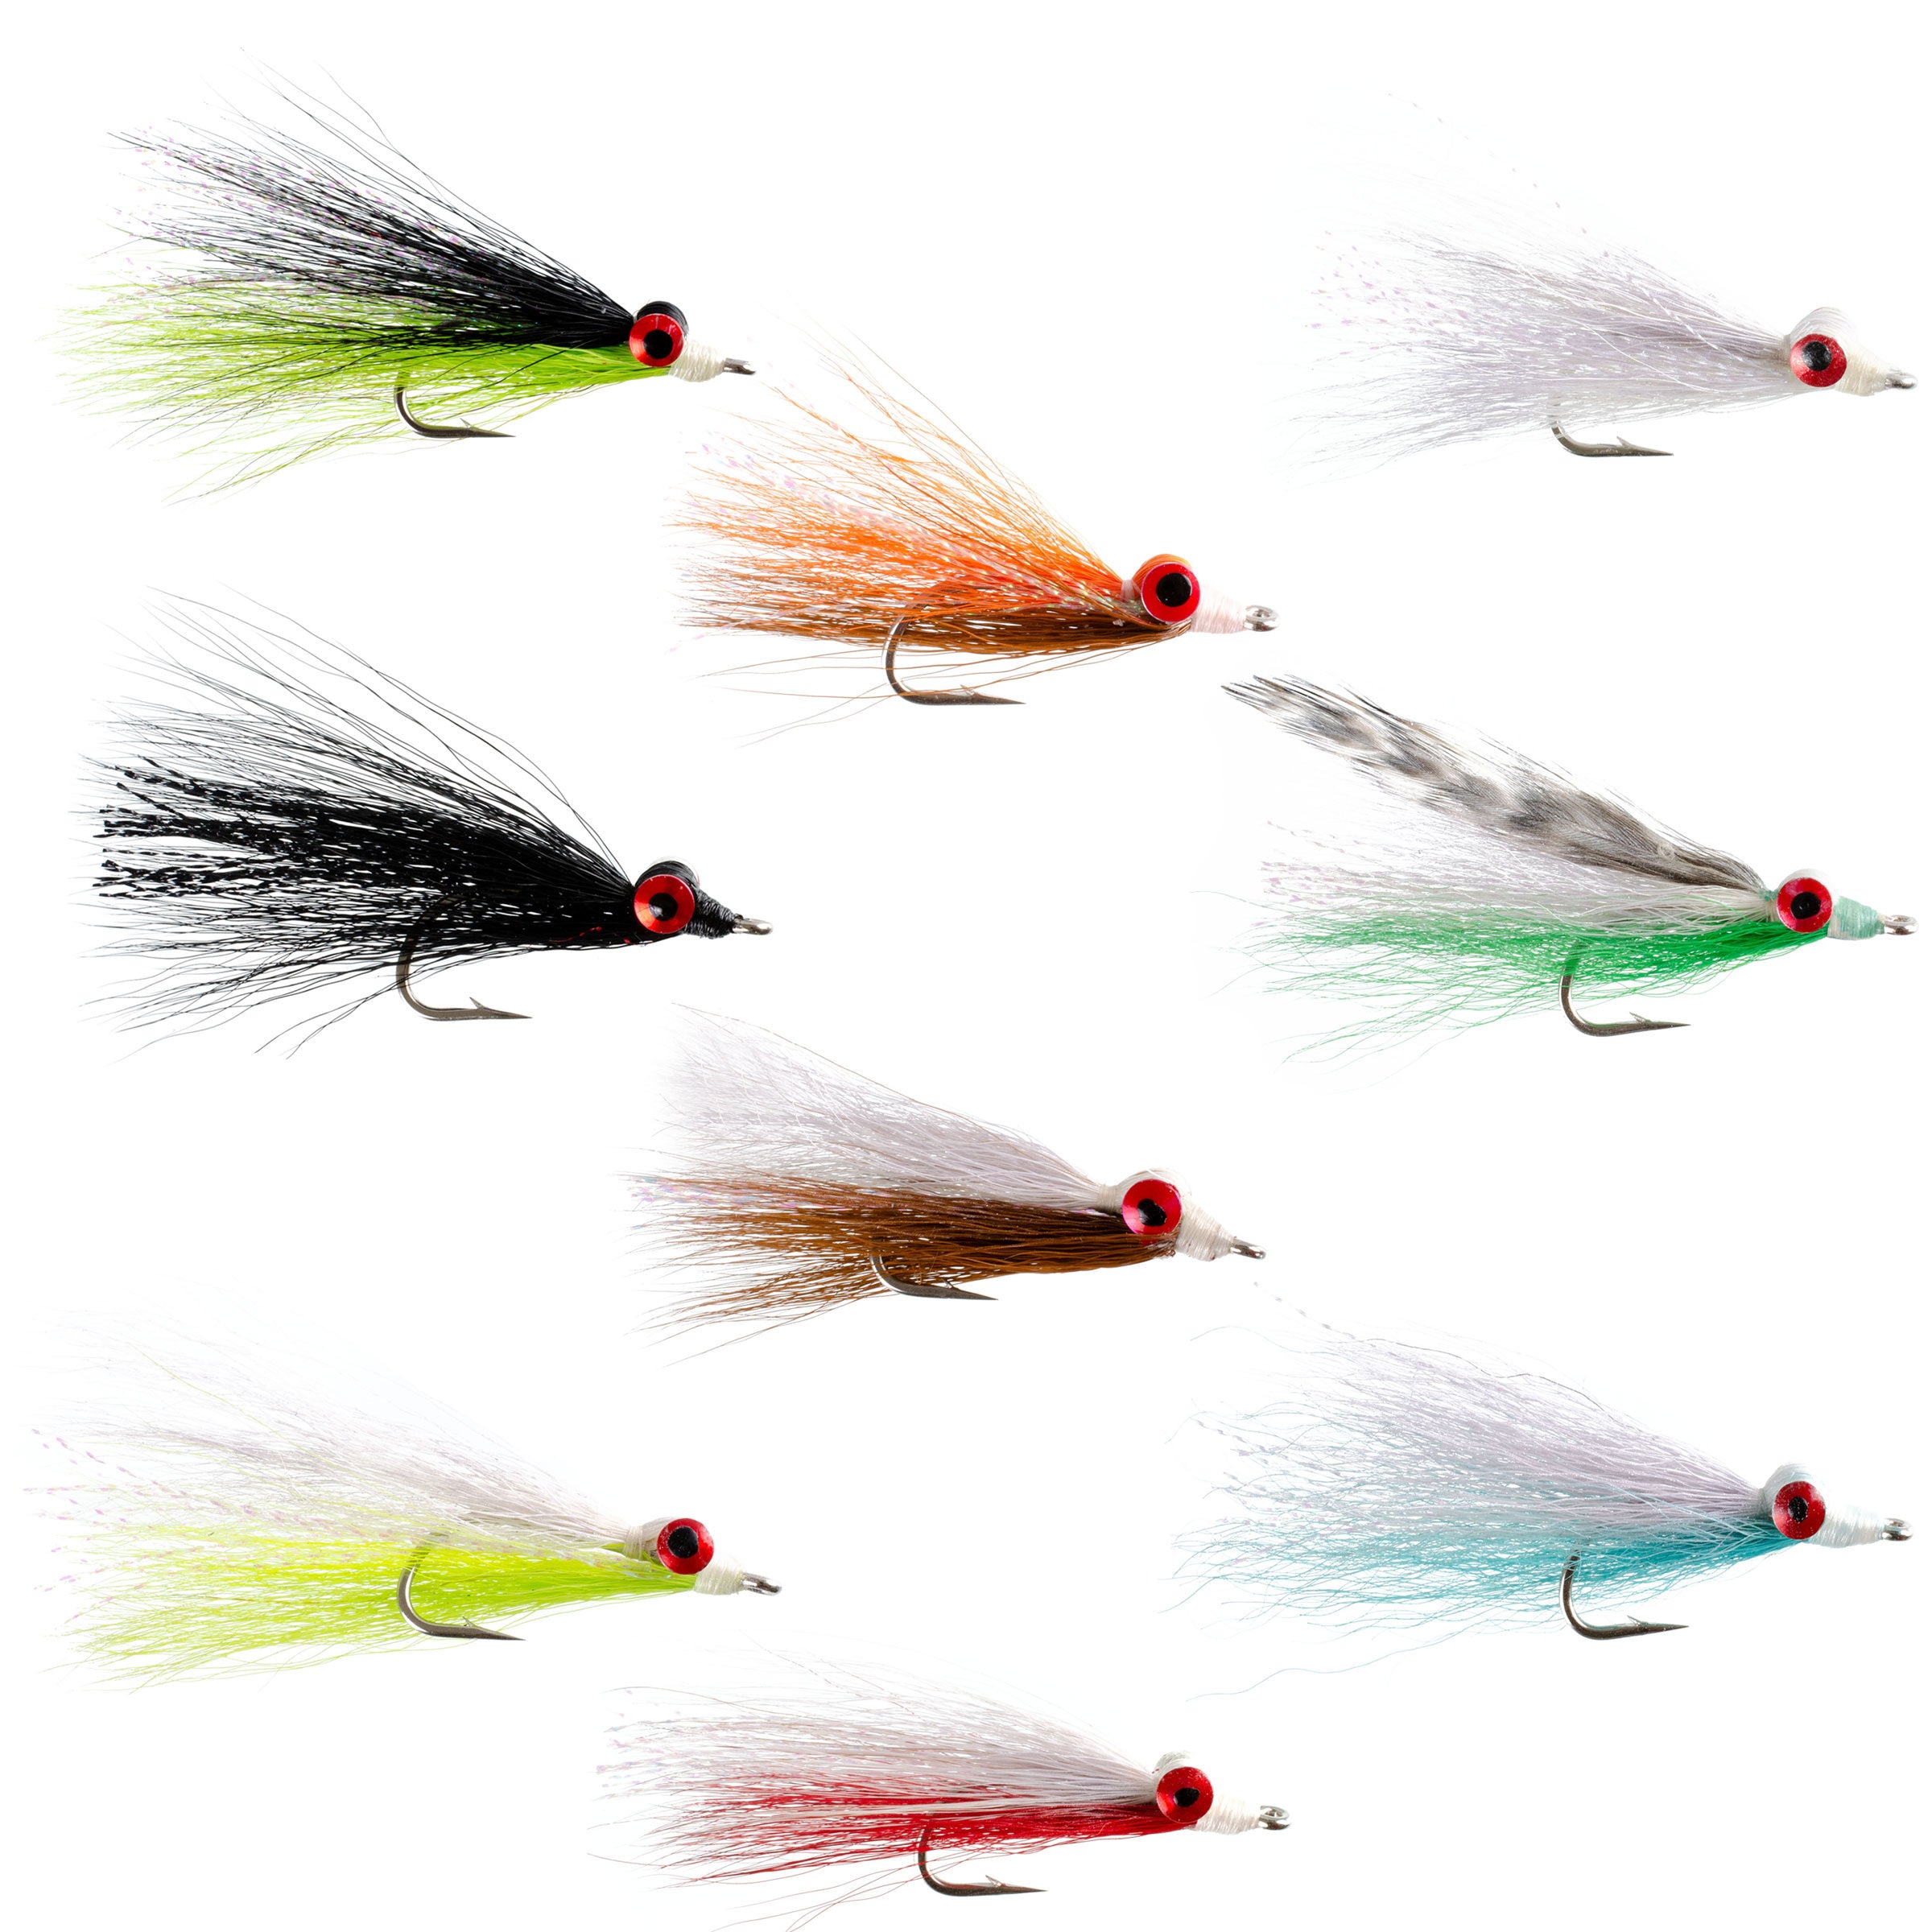 Clousers Minnow Fly Fishing Flies Assortment - Collection of 9 Saltwater and Bass Flies - Hook Size 1/0